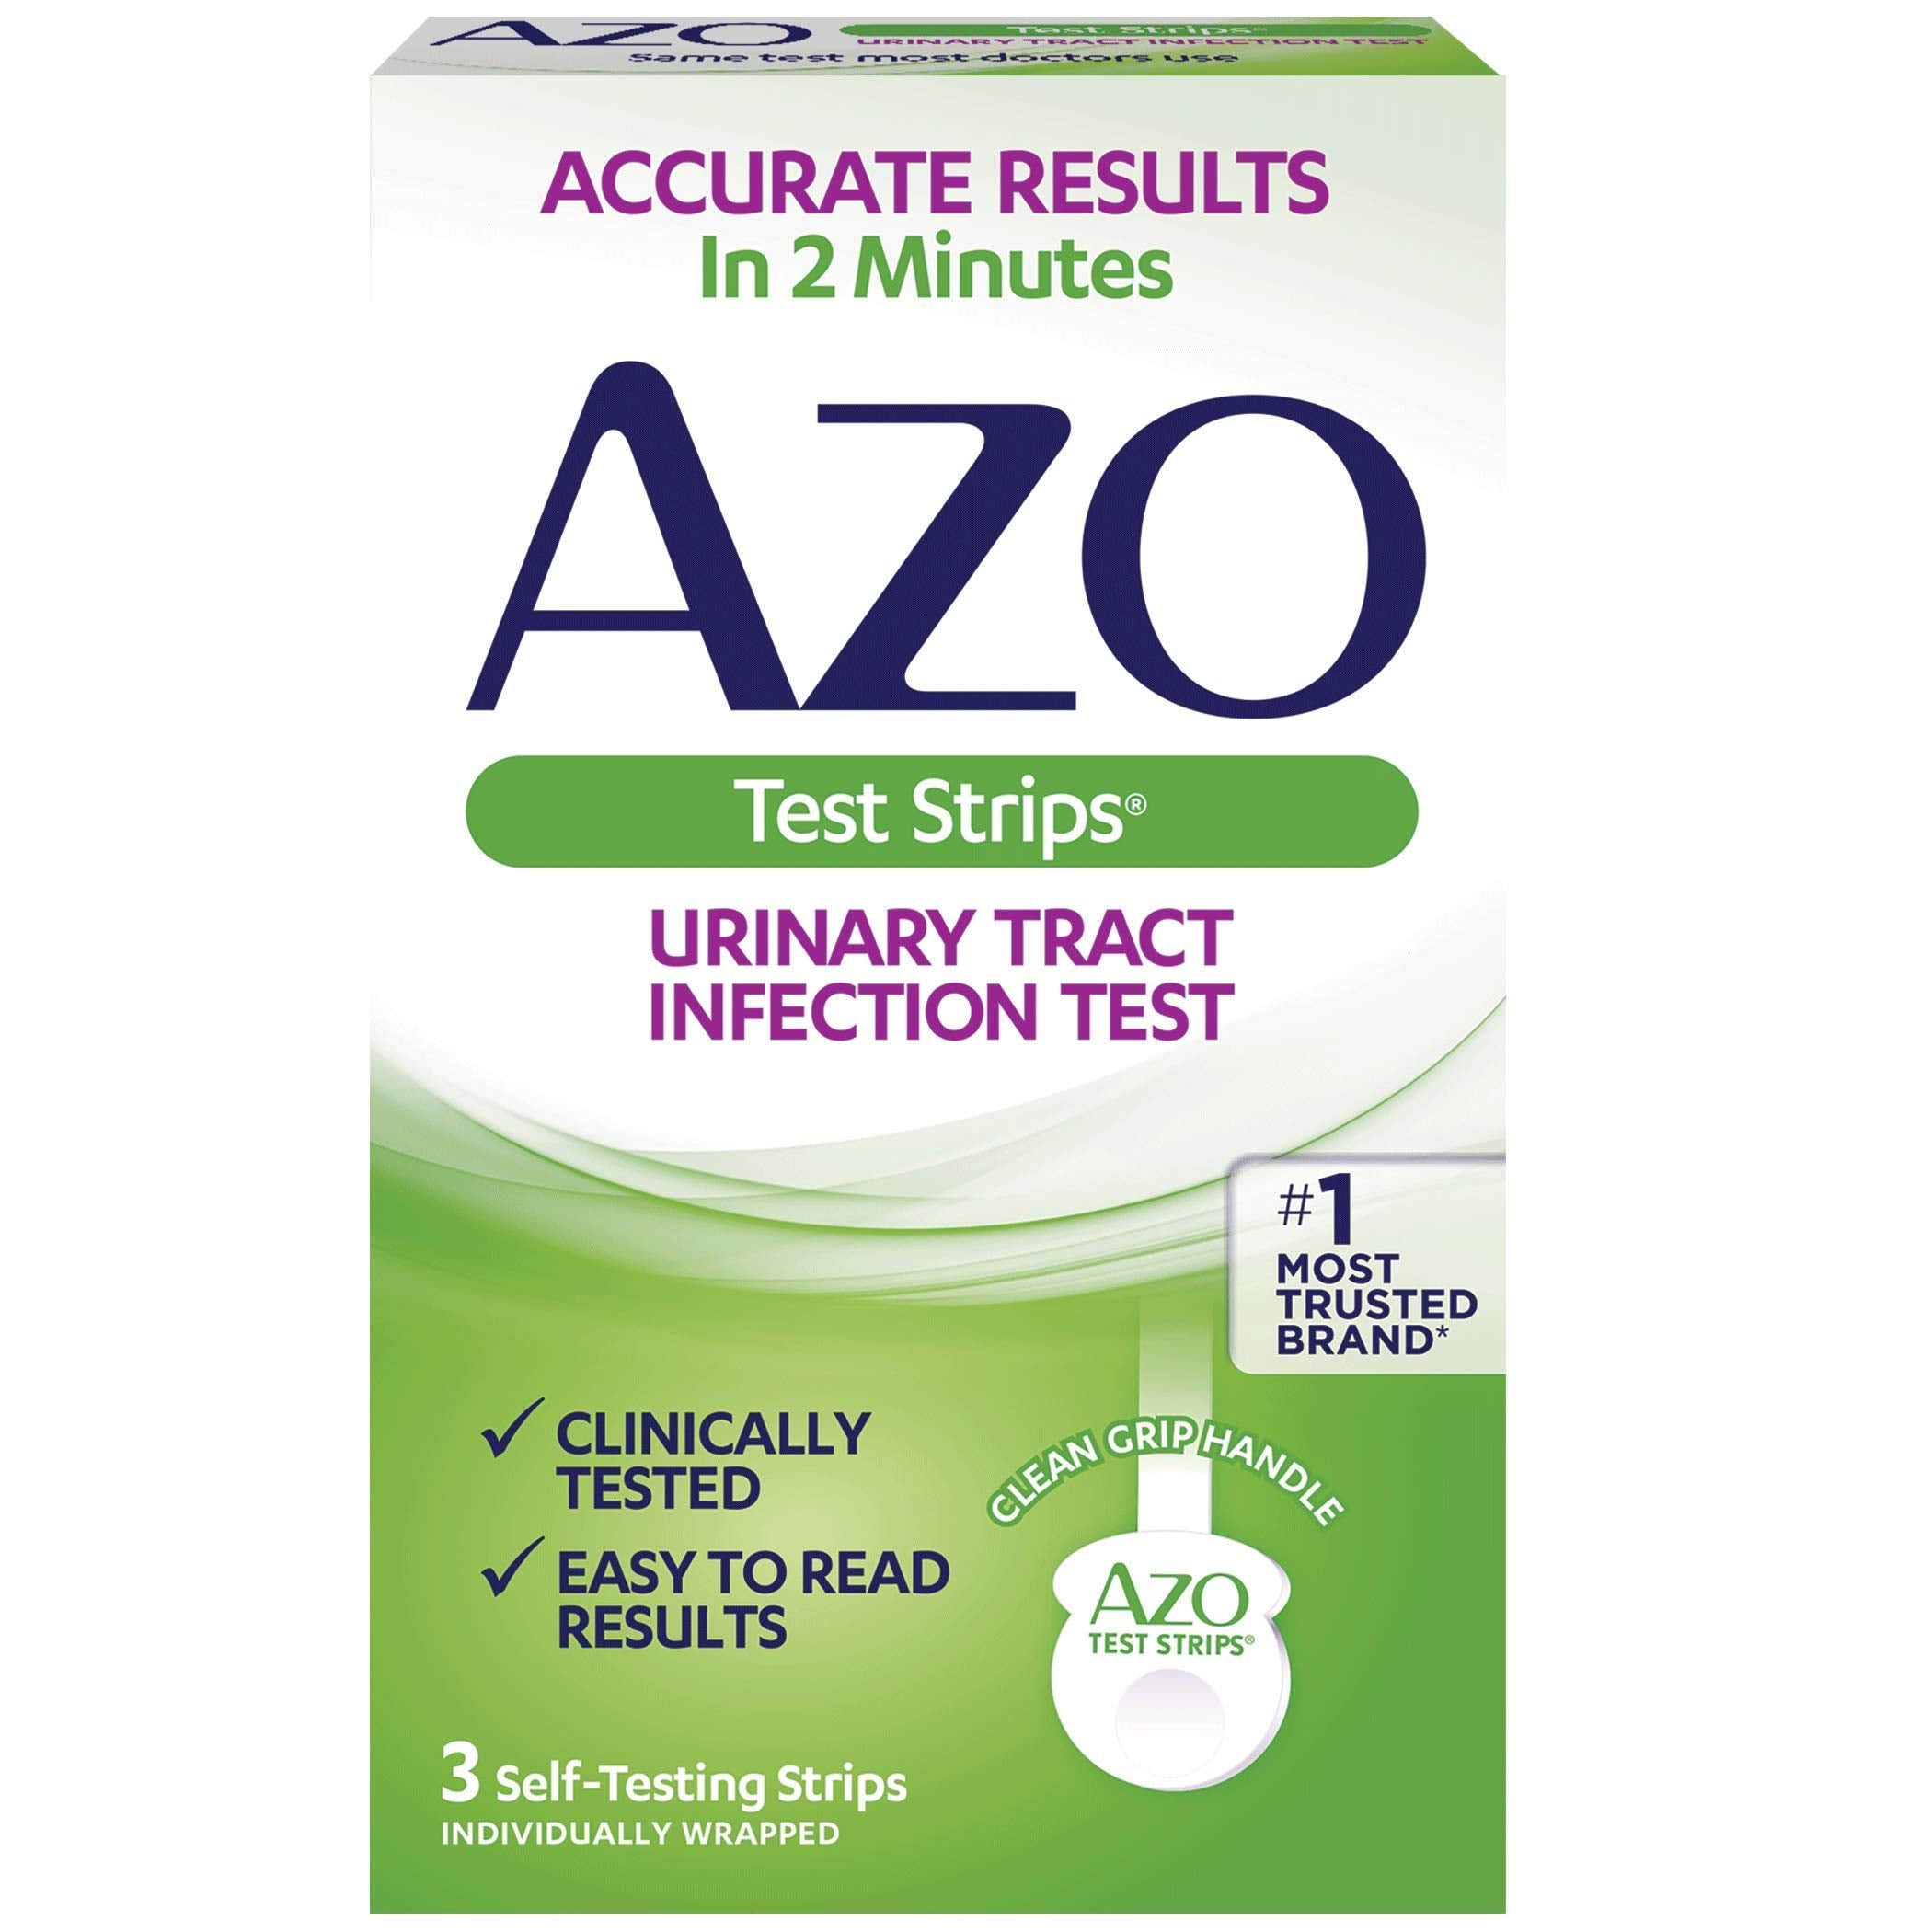 Azo Urinary Tract Infection Test Strips - 3 Count